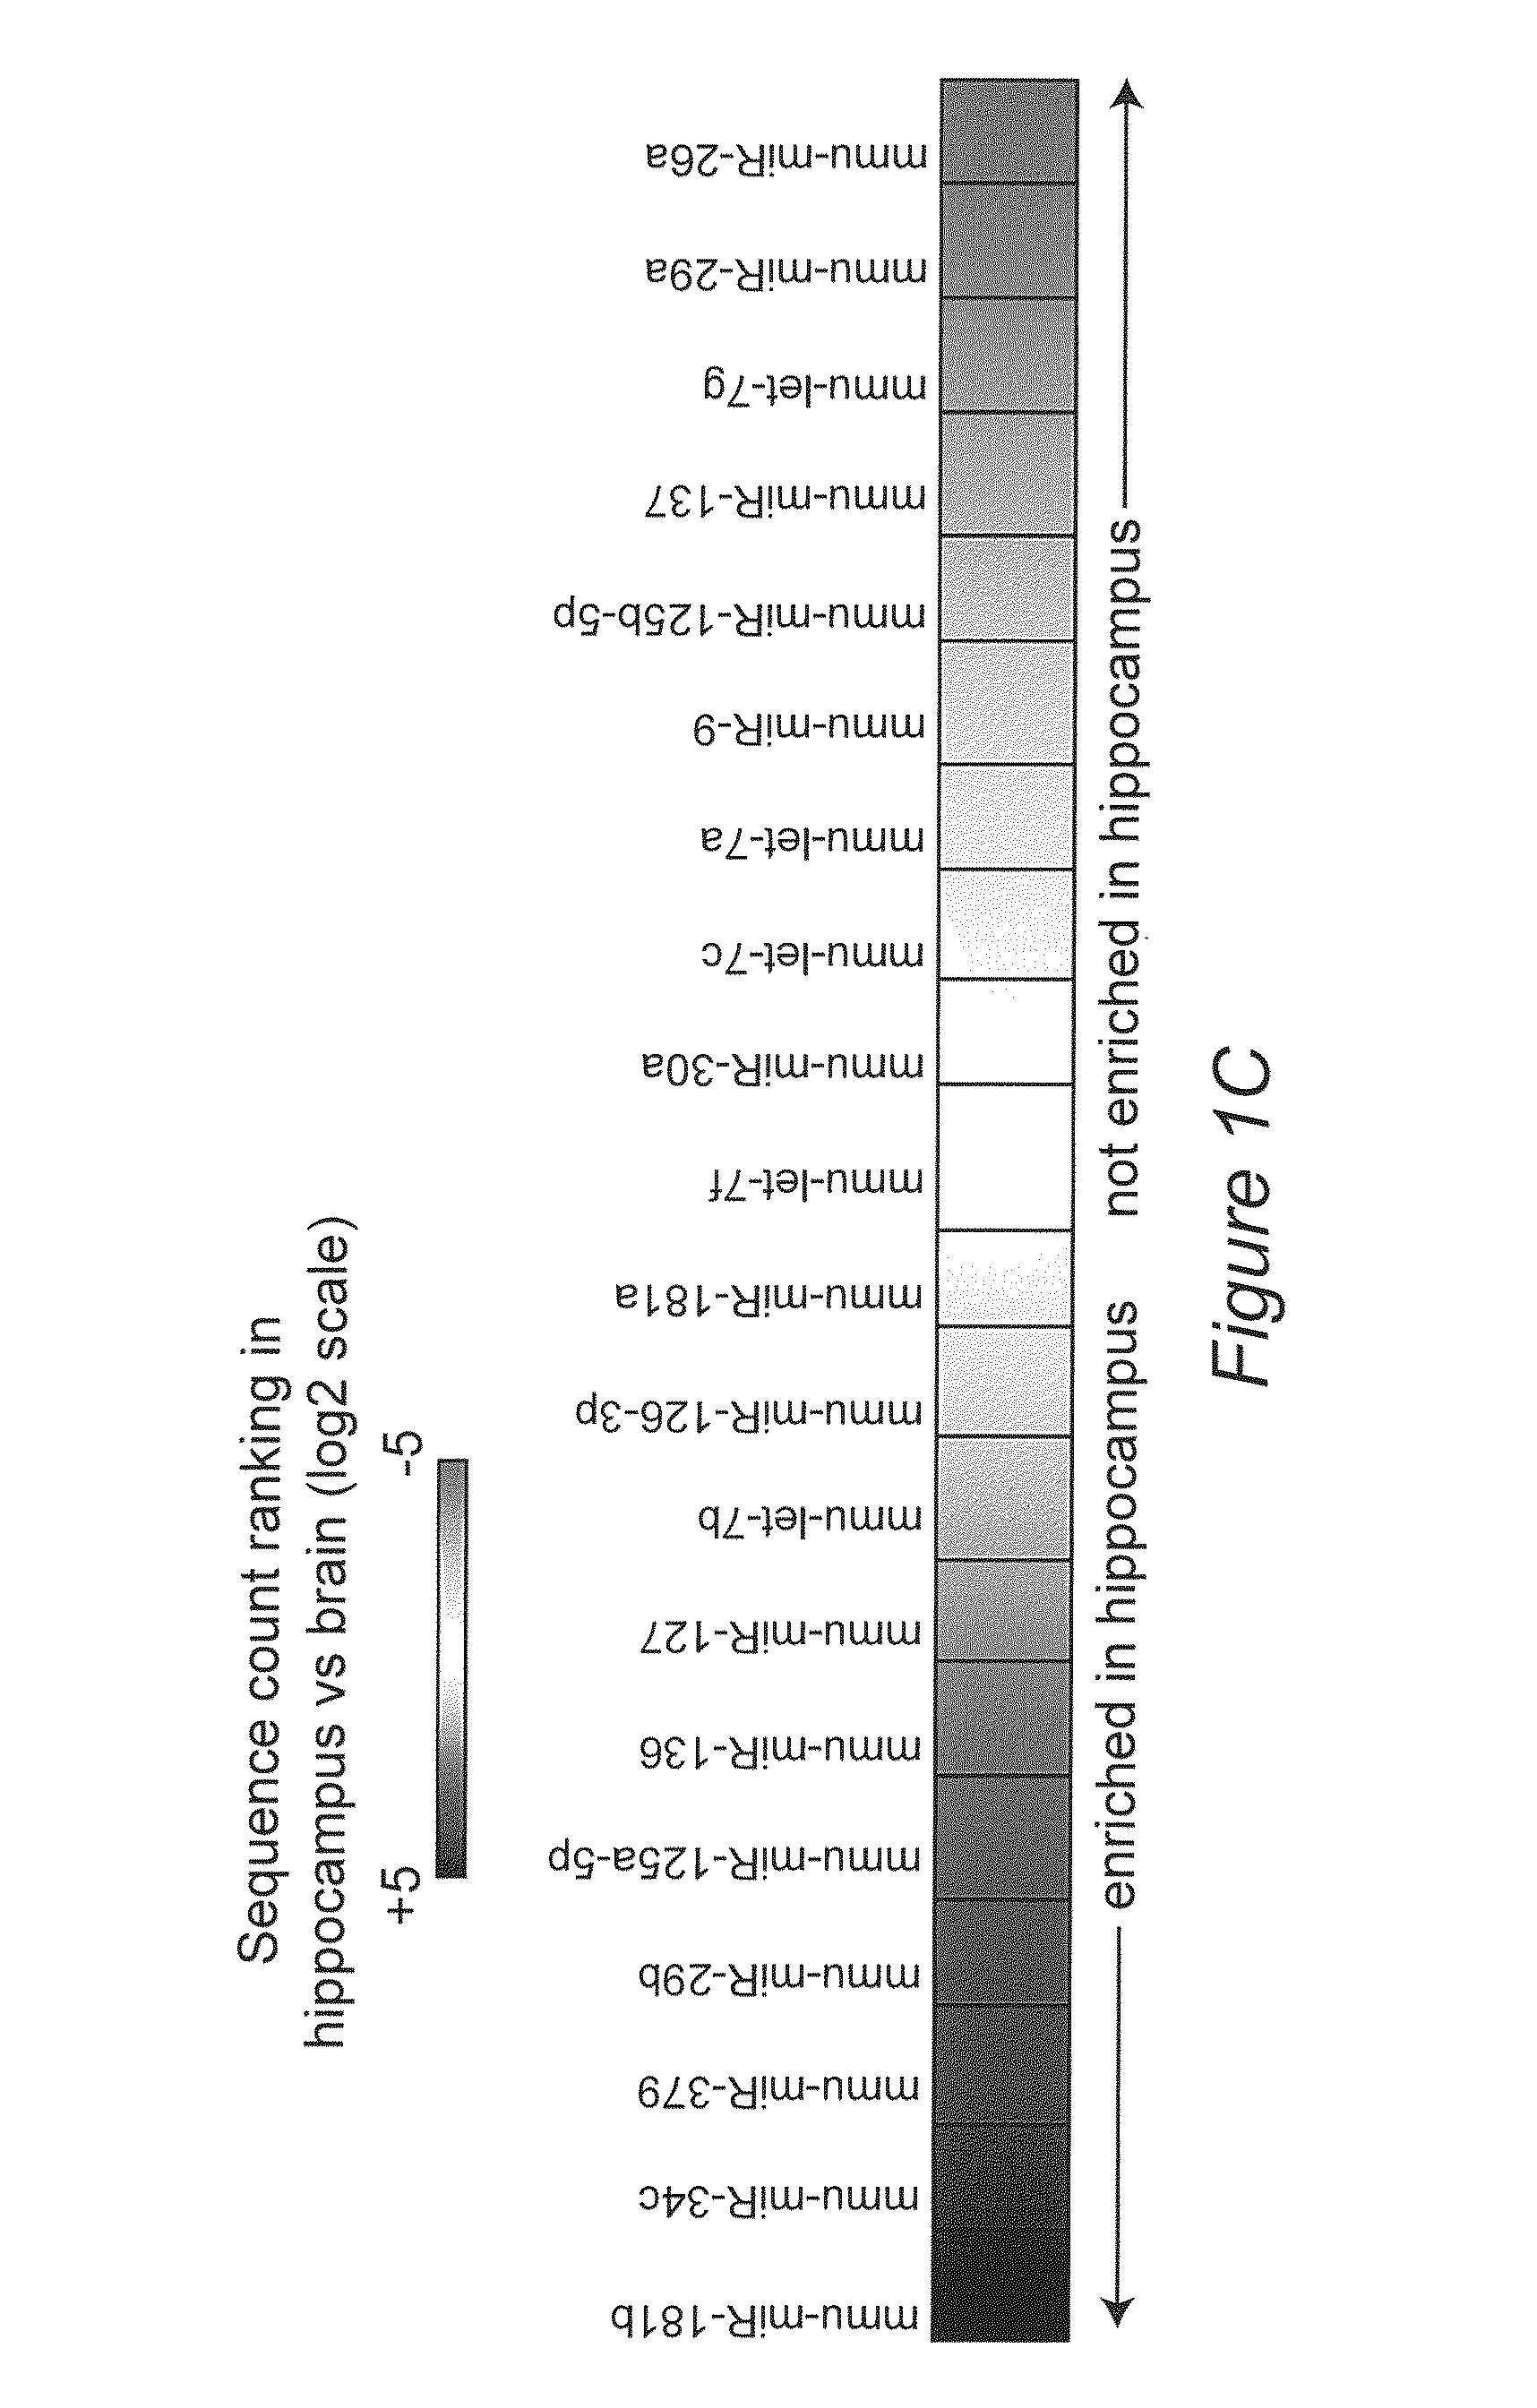 Method for preventing or treating memory impairment and pharmaceutical compositions useful therefore